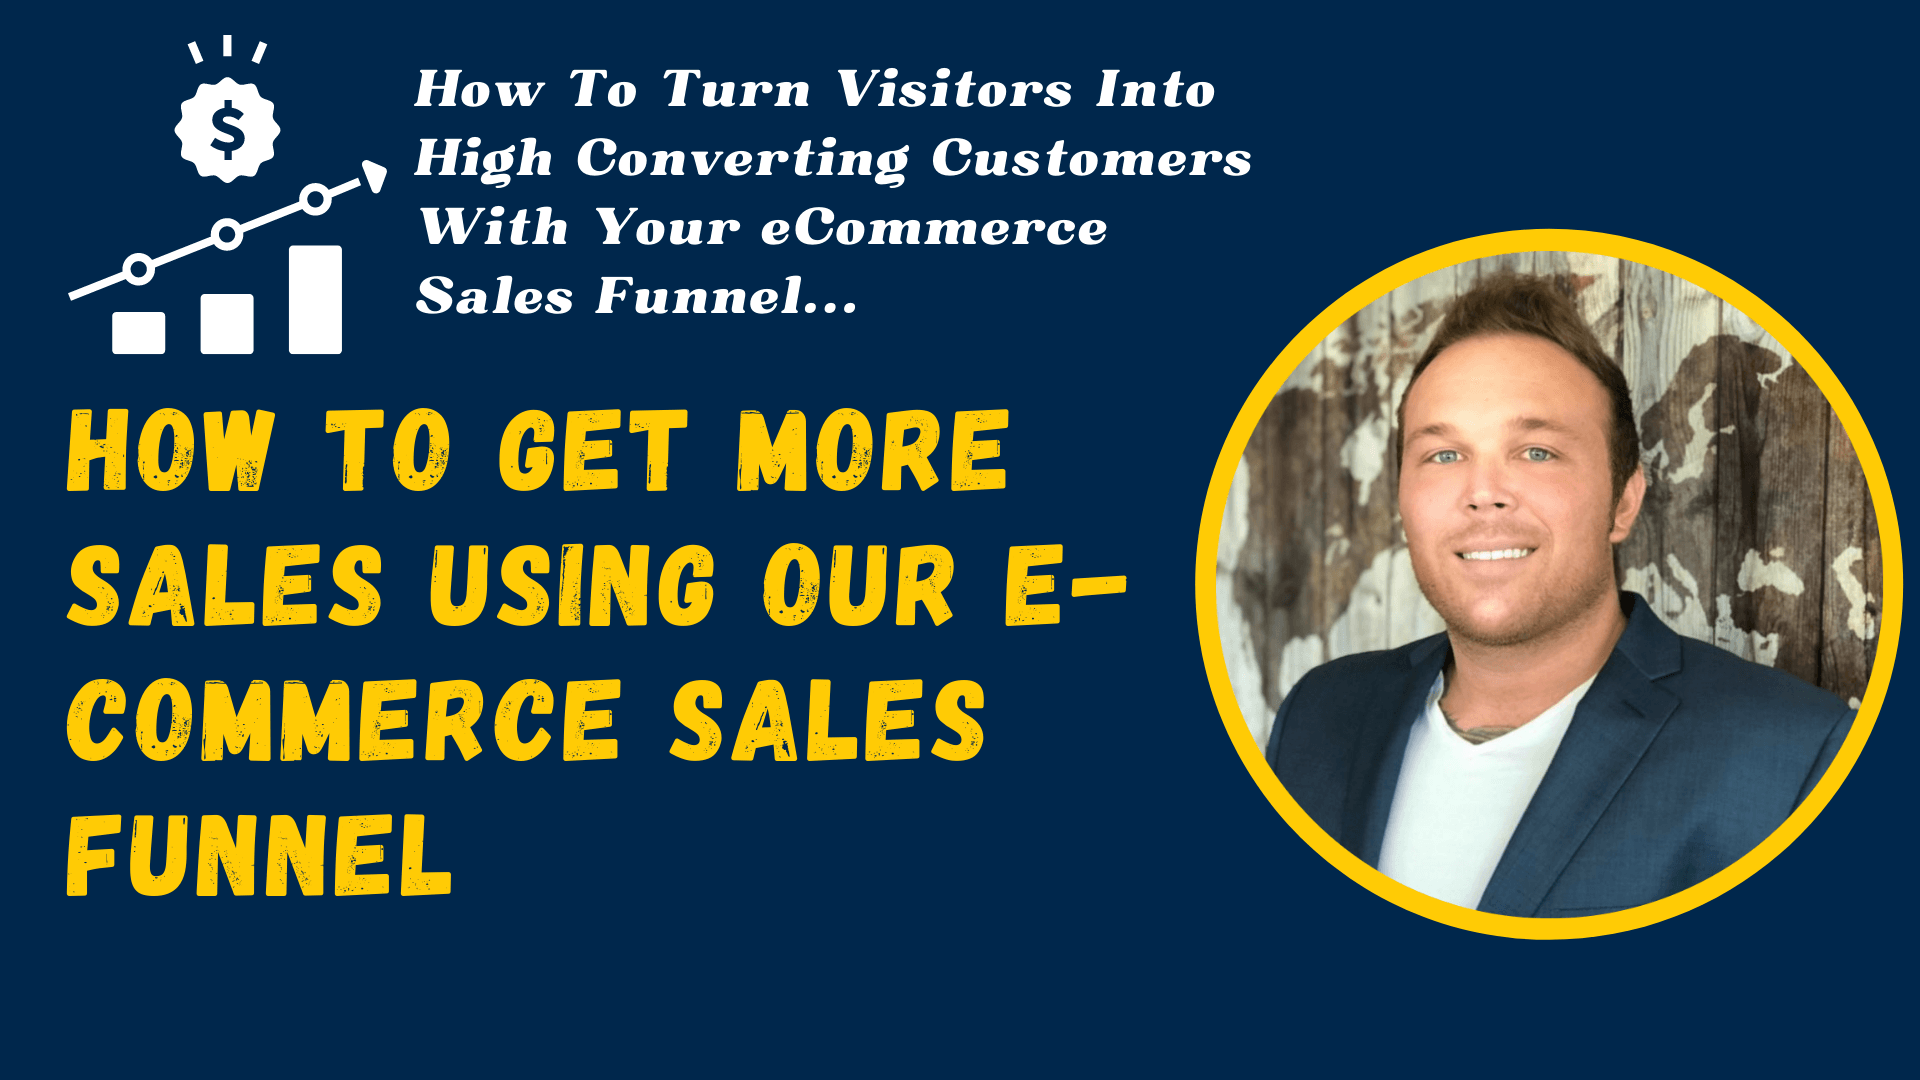 How To Use An Appointment Sales Funnel To Get More Leads